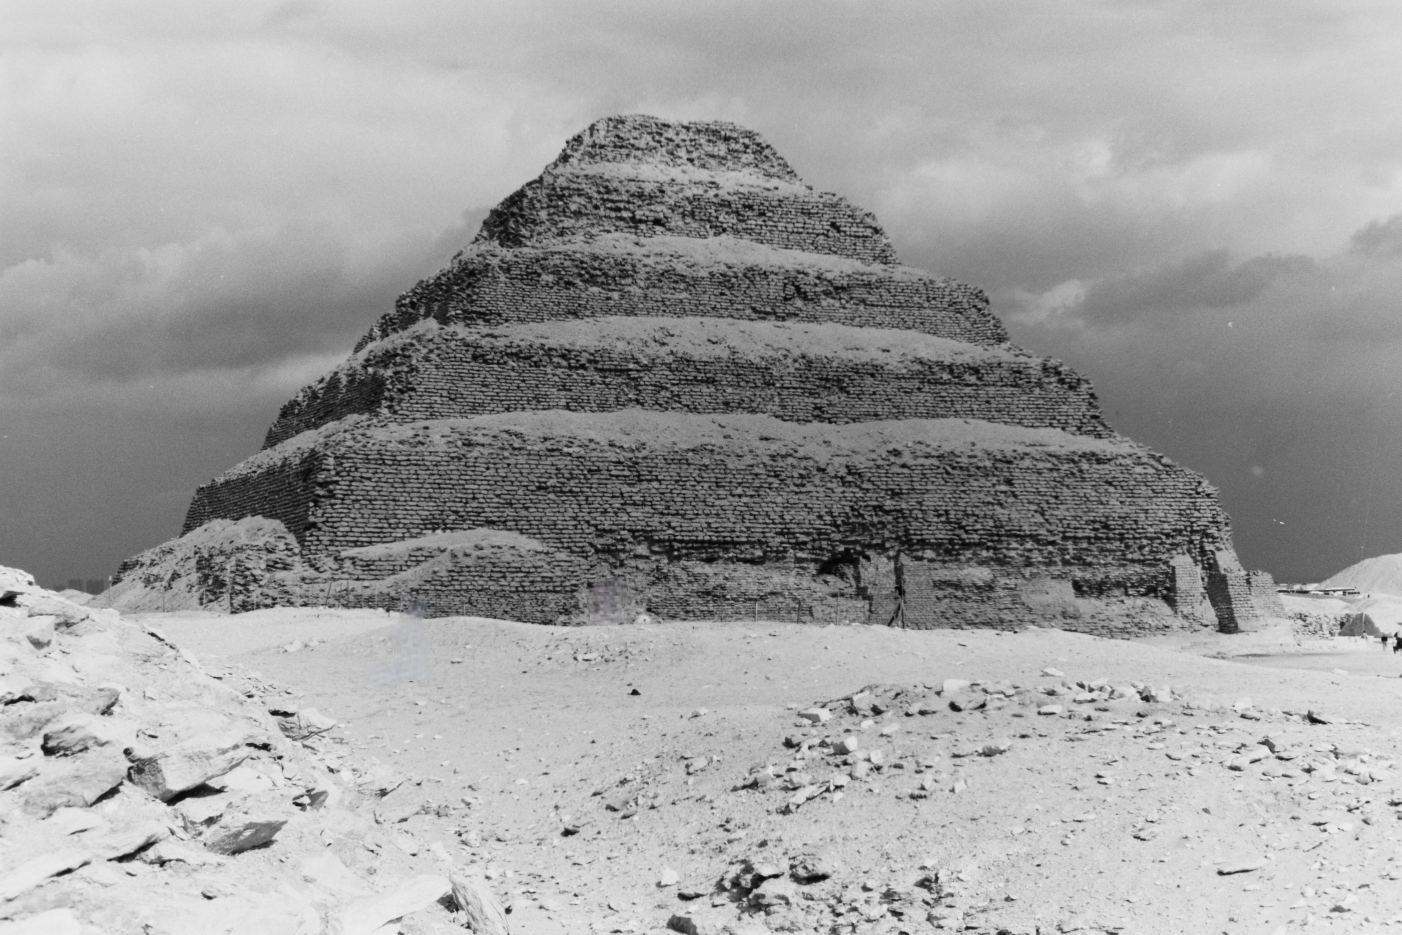 Advanced machines of unknown origin mentioned in a 440 BC text may have helped to build the pyramids of Egypt 2